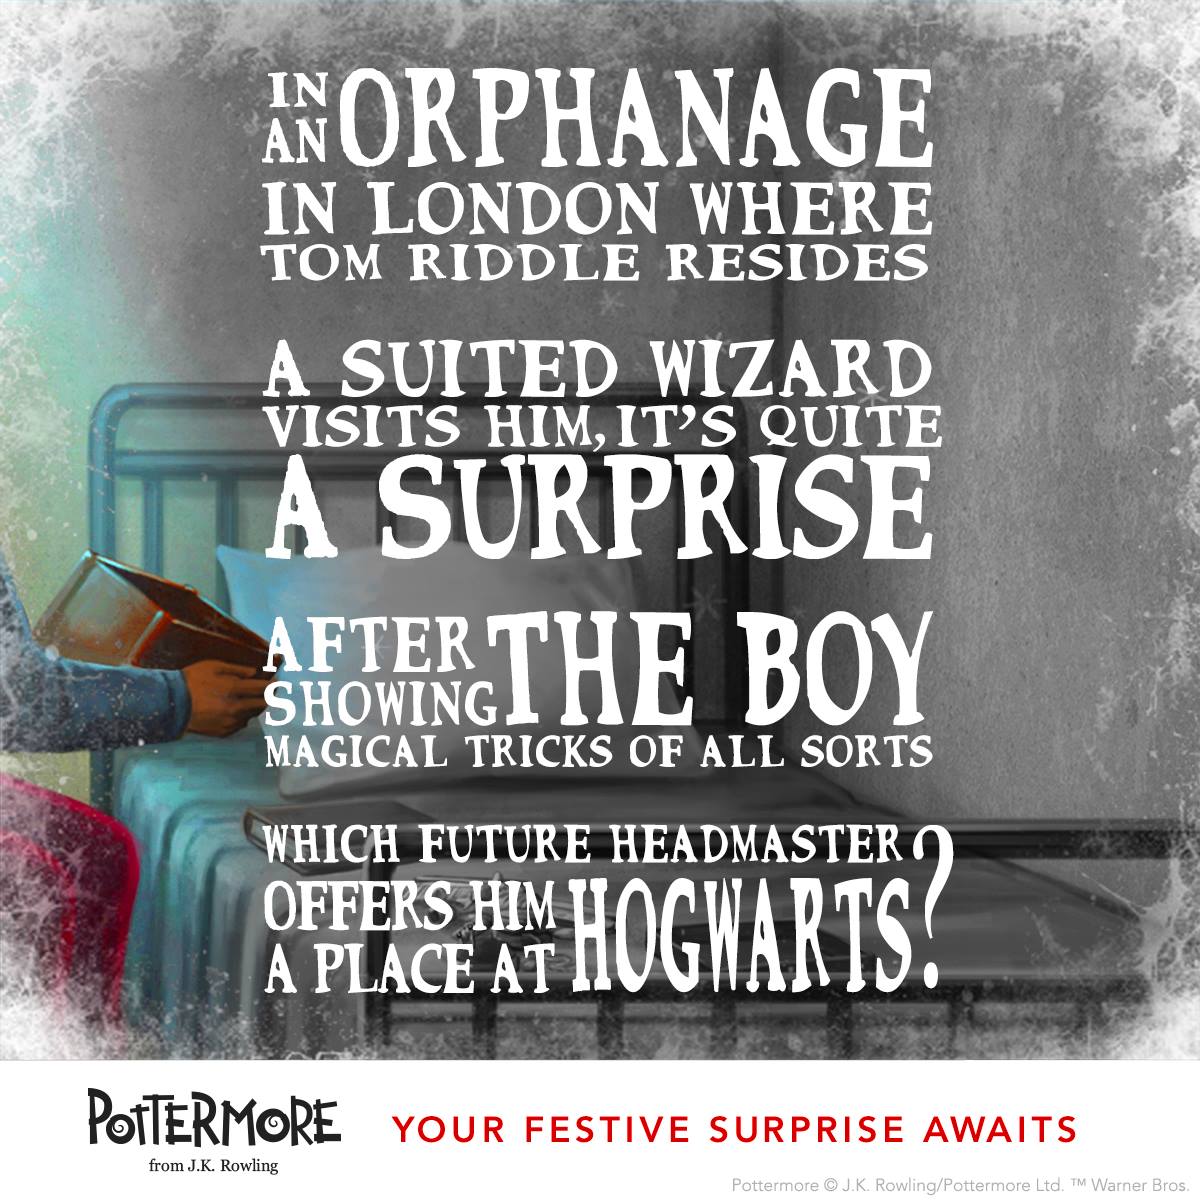 Day 5 of J.K. Rowling’s Twelve Days of Christmas Harry Potter Moments